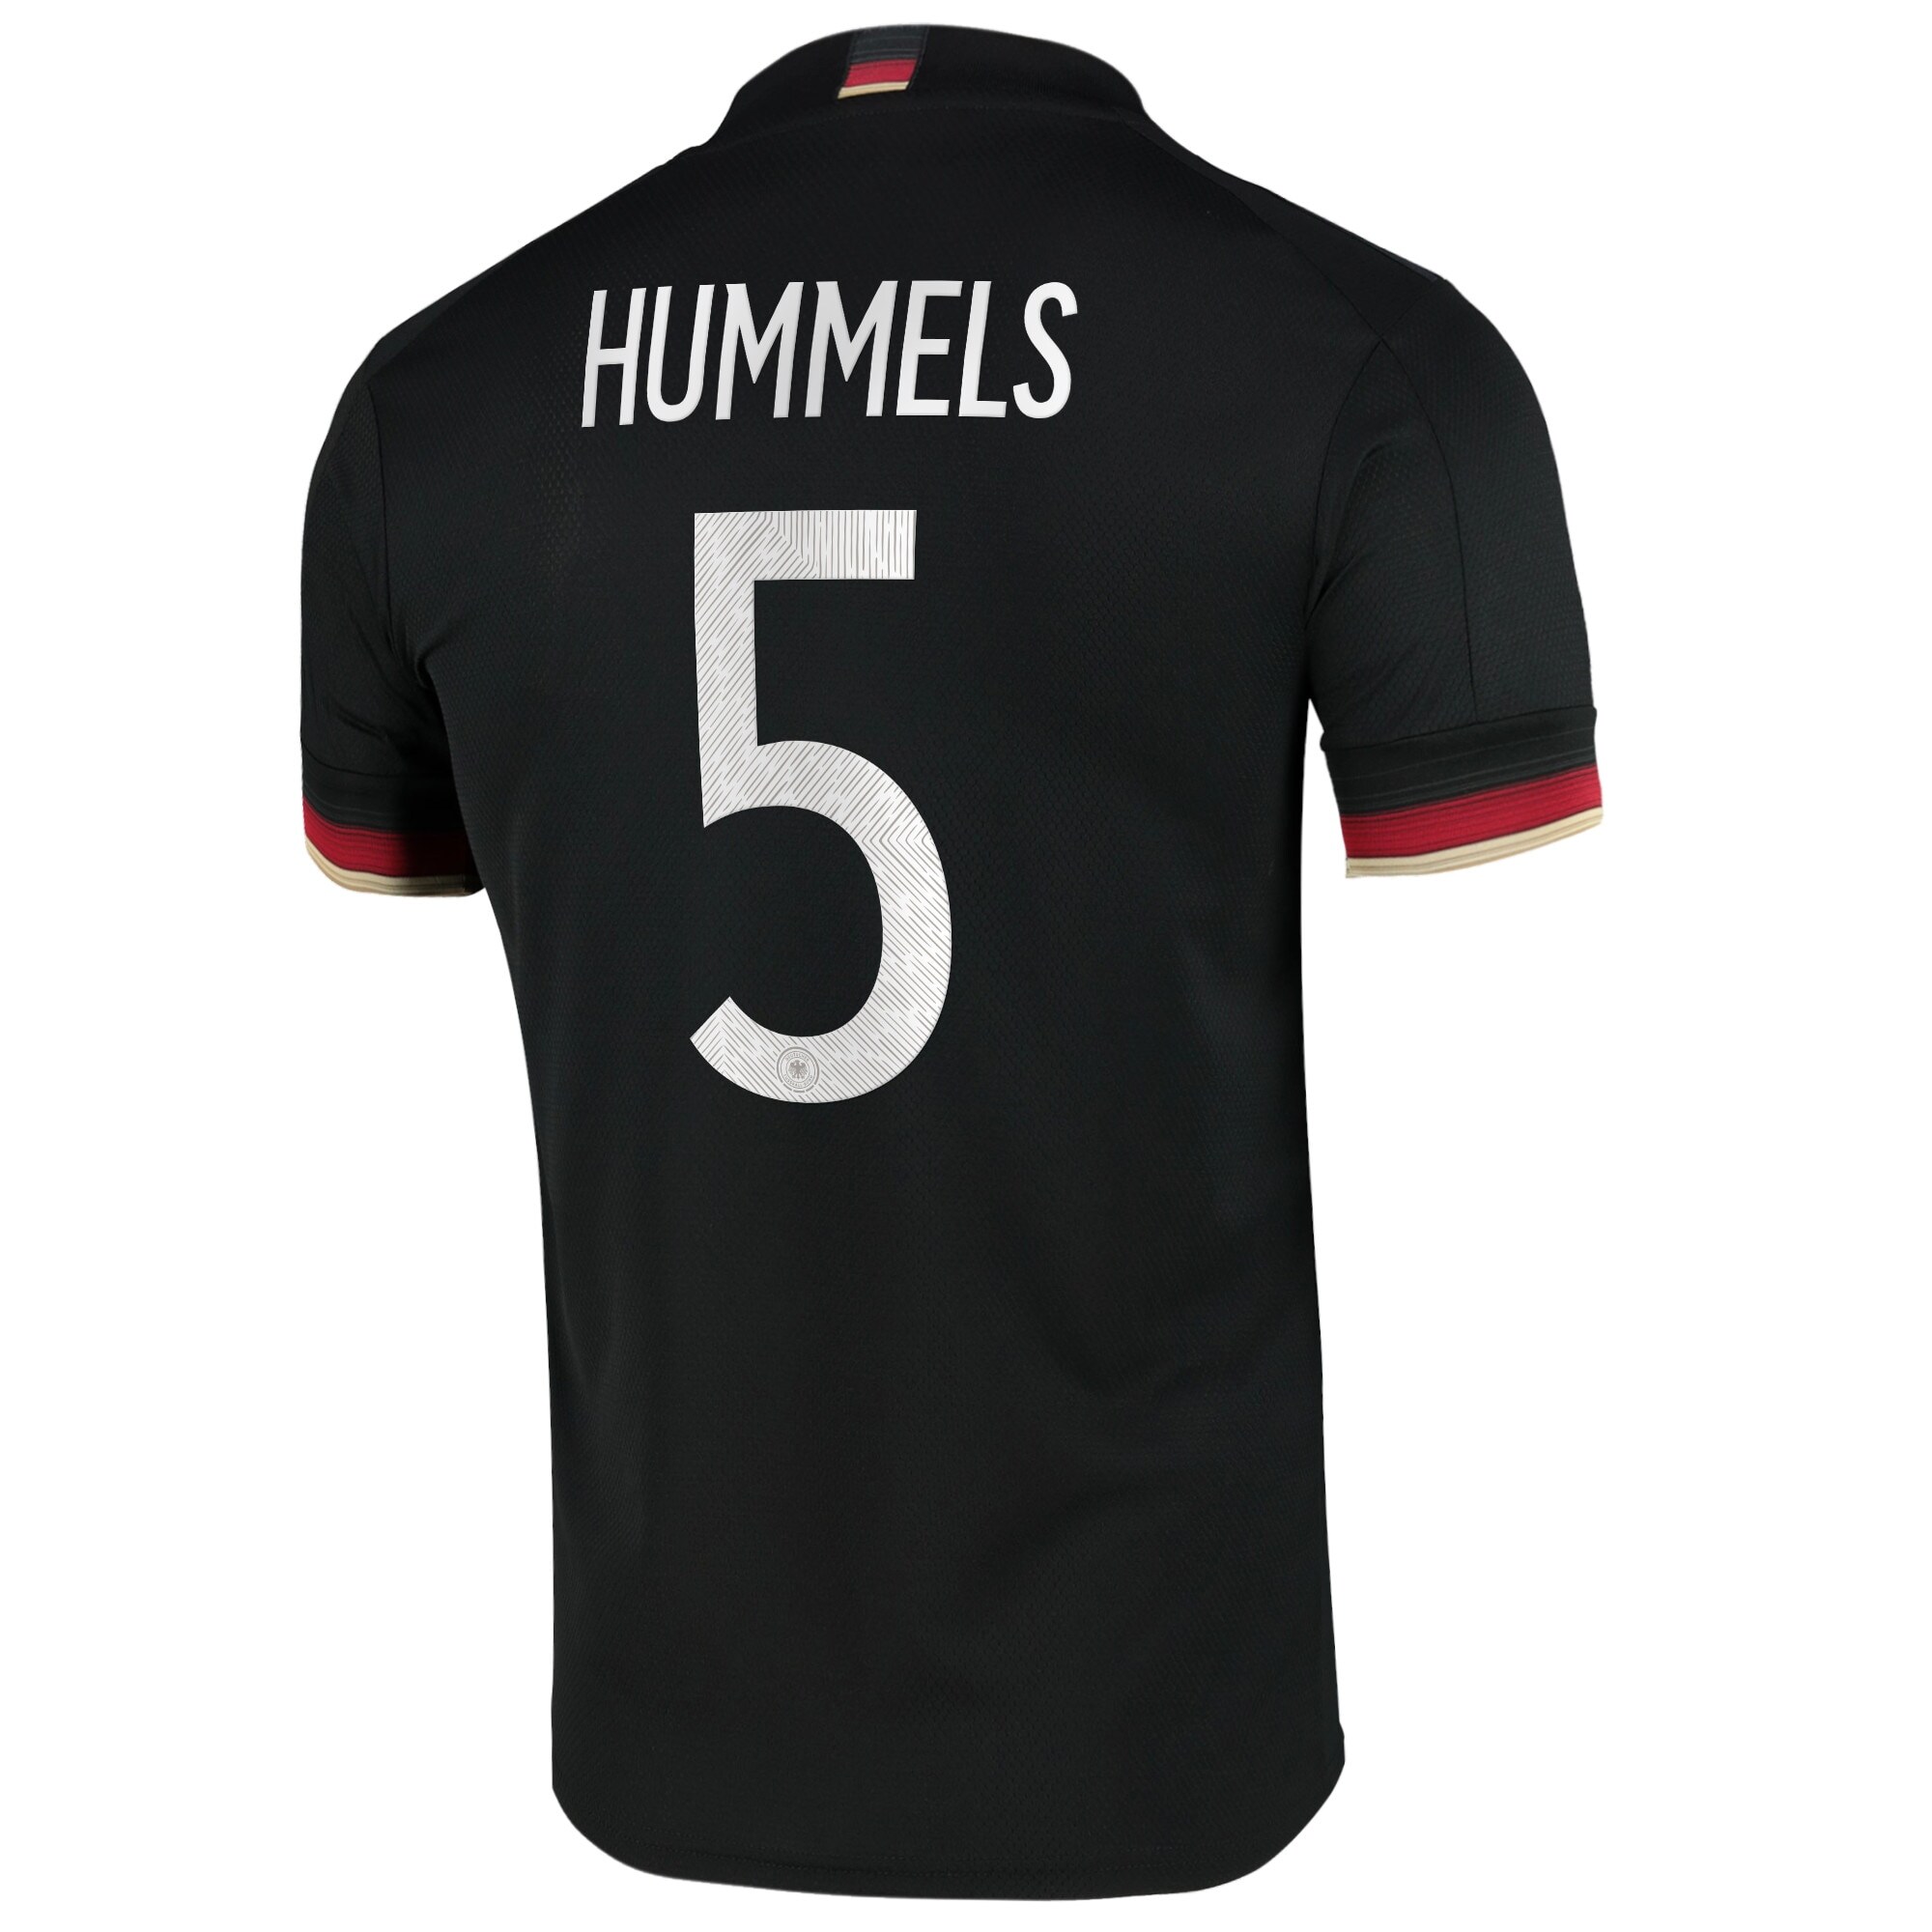 Germany Away Shirt 2021-22 with Hummels 5 printing